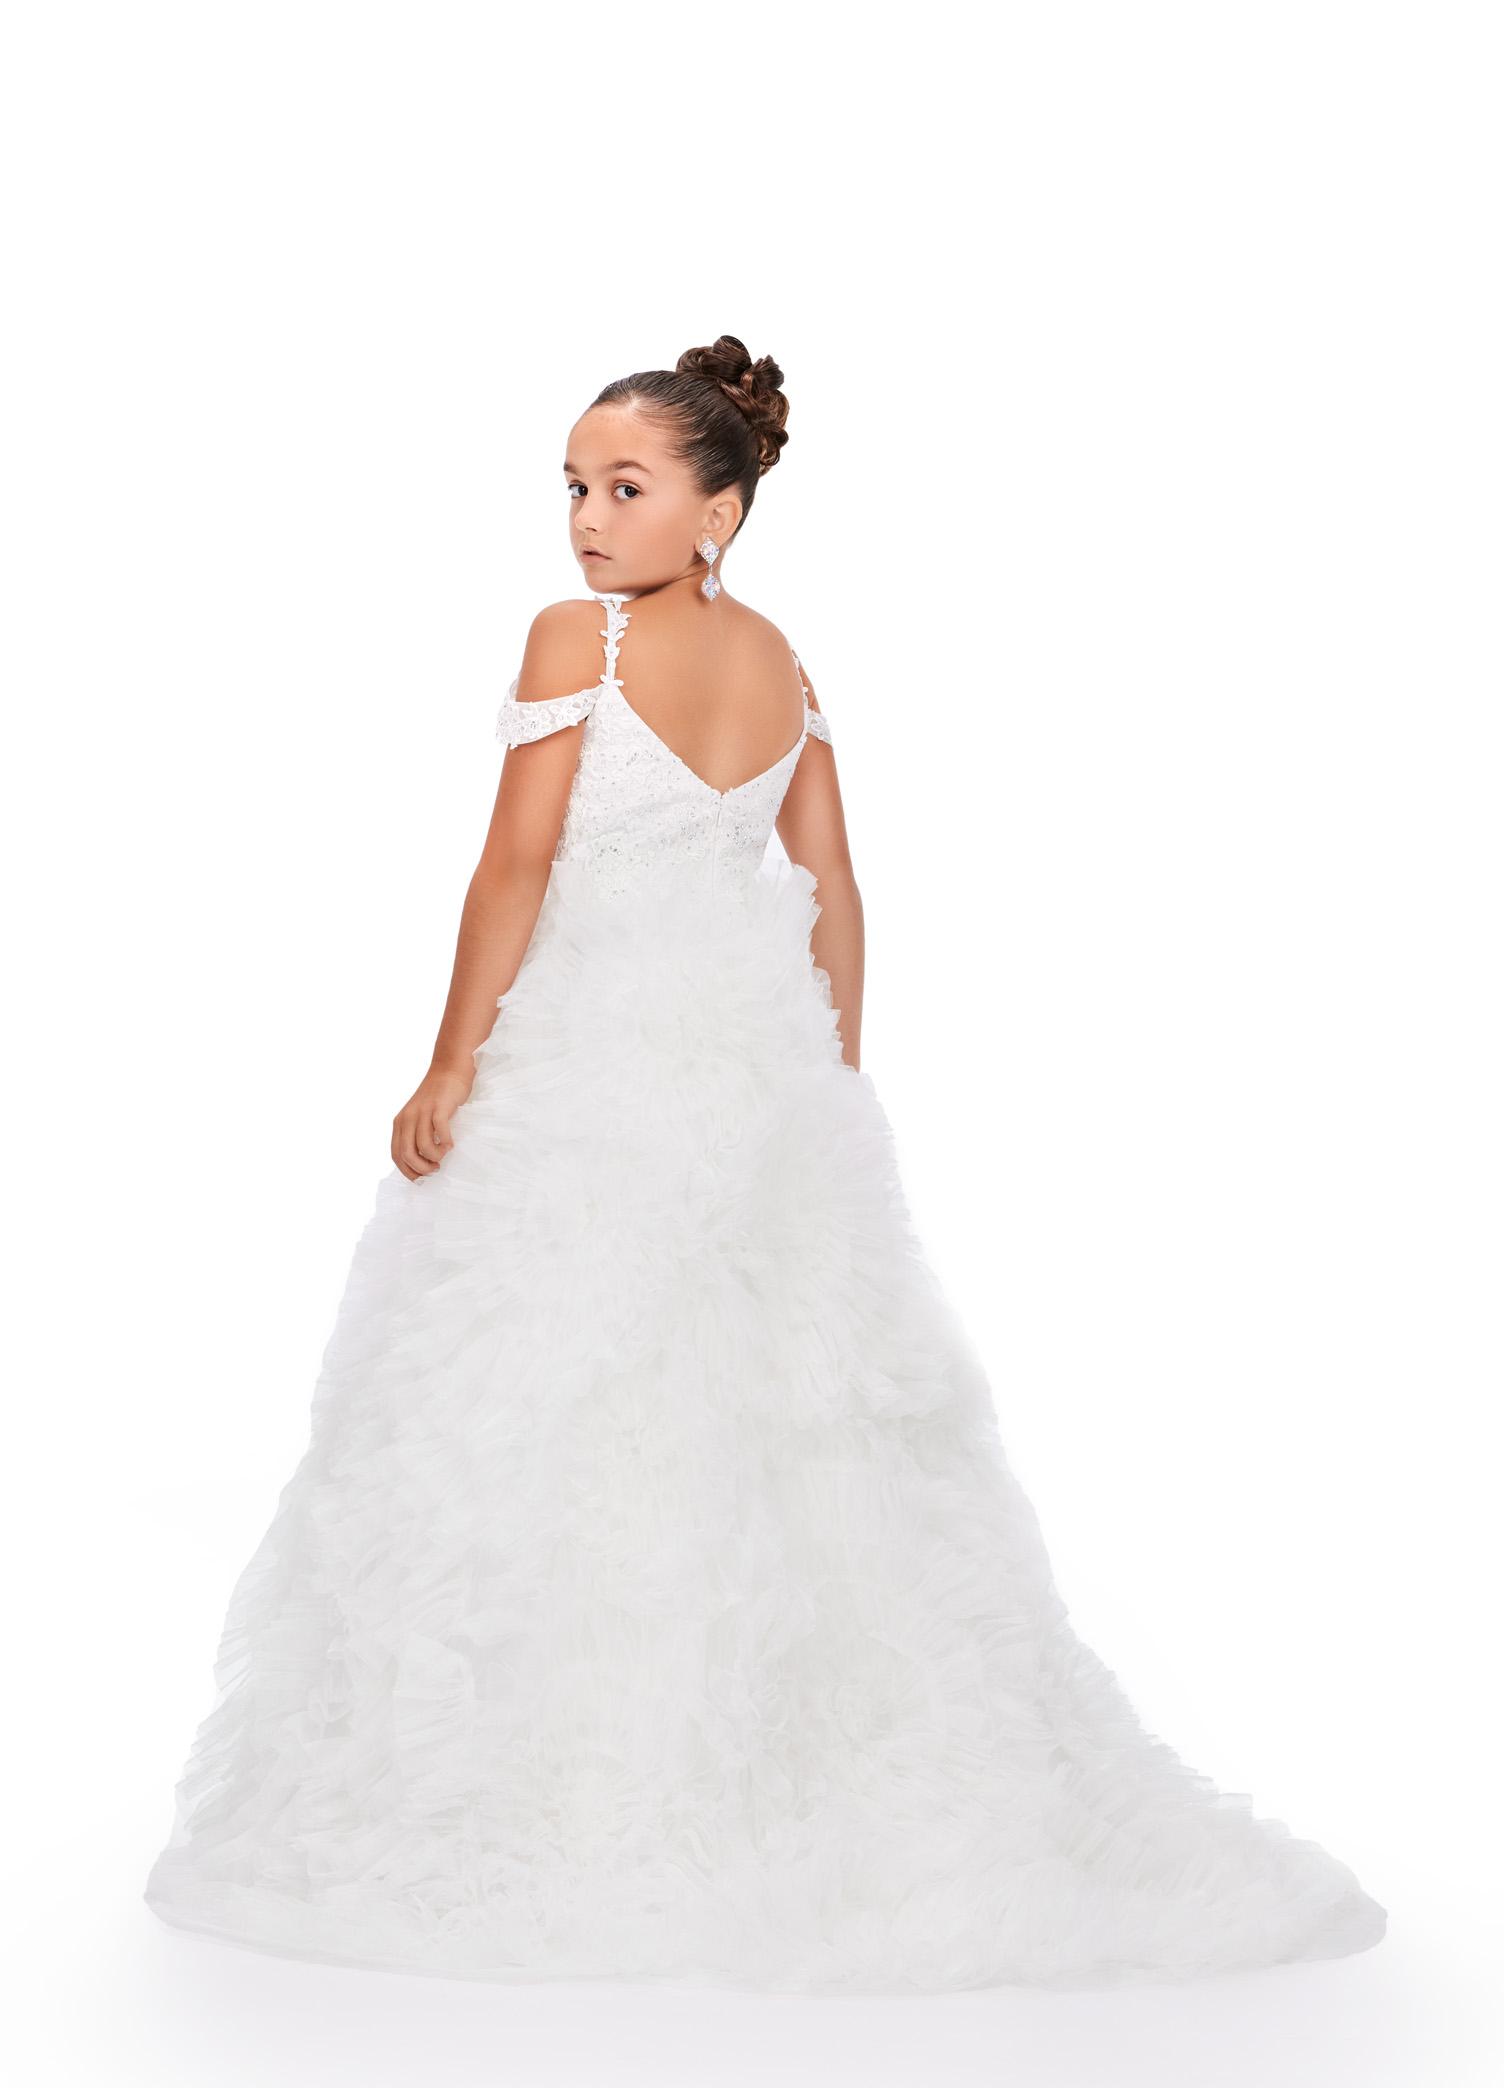 Flower Girls White Dress for Party Summer Lace Stitching Ball Gown Dress  Clothes | eBay